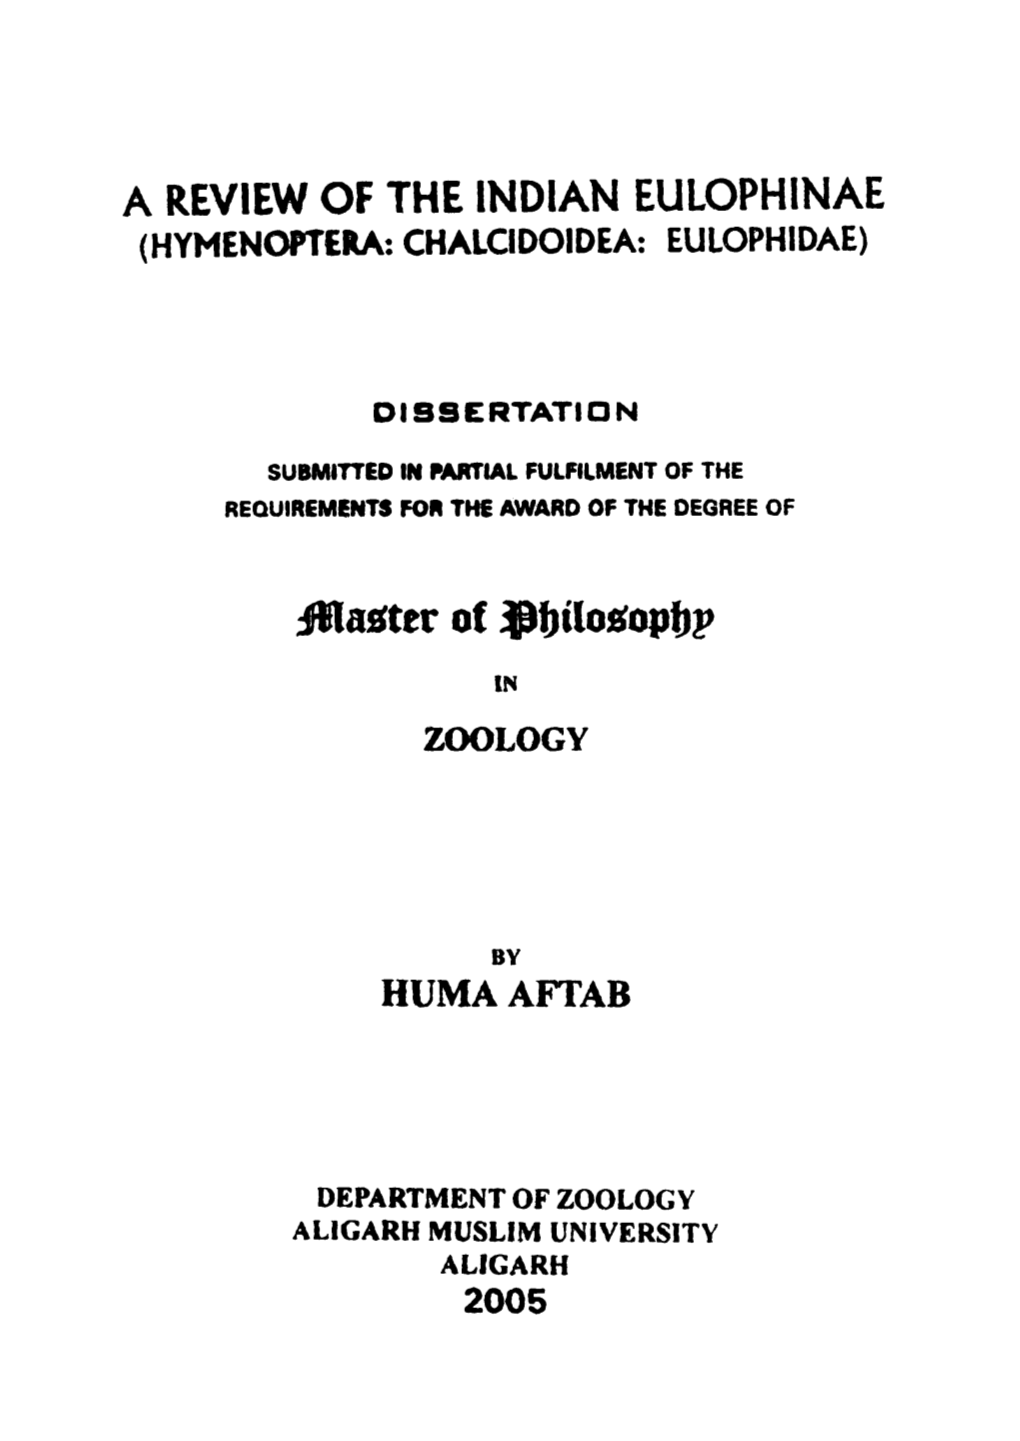 A Review of the Indian Eulophinae (Hymenoftera: Chalcidoidea: Eulophidae)